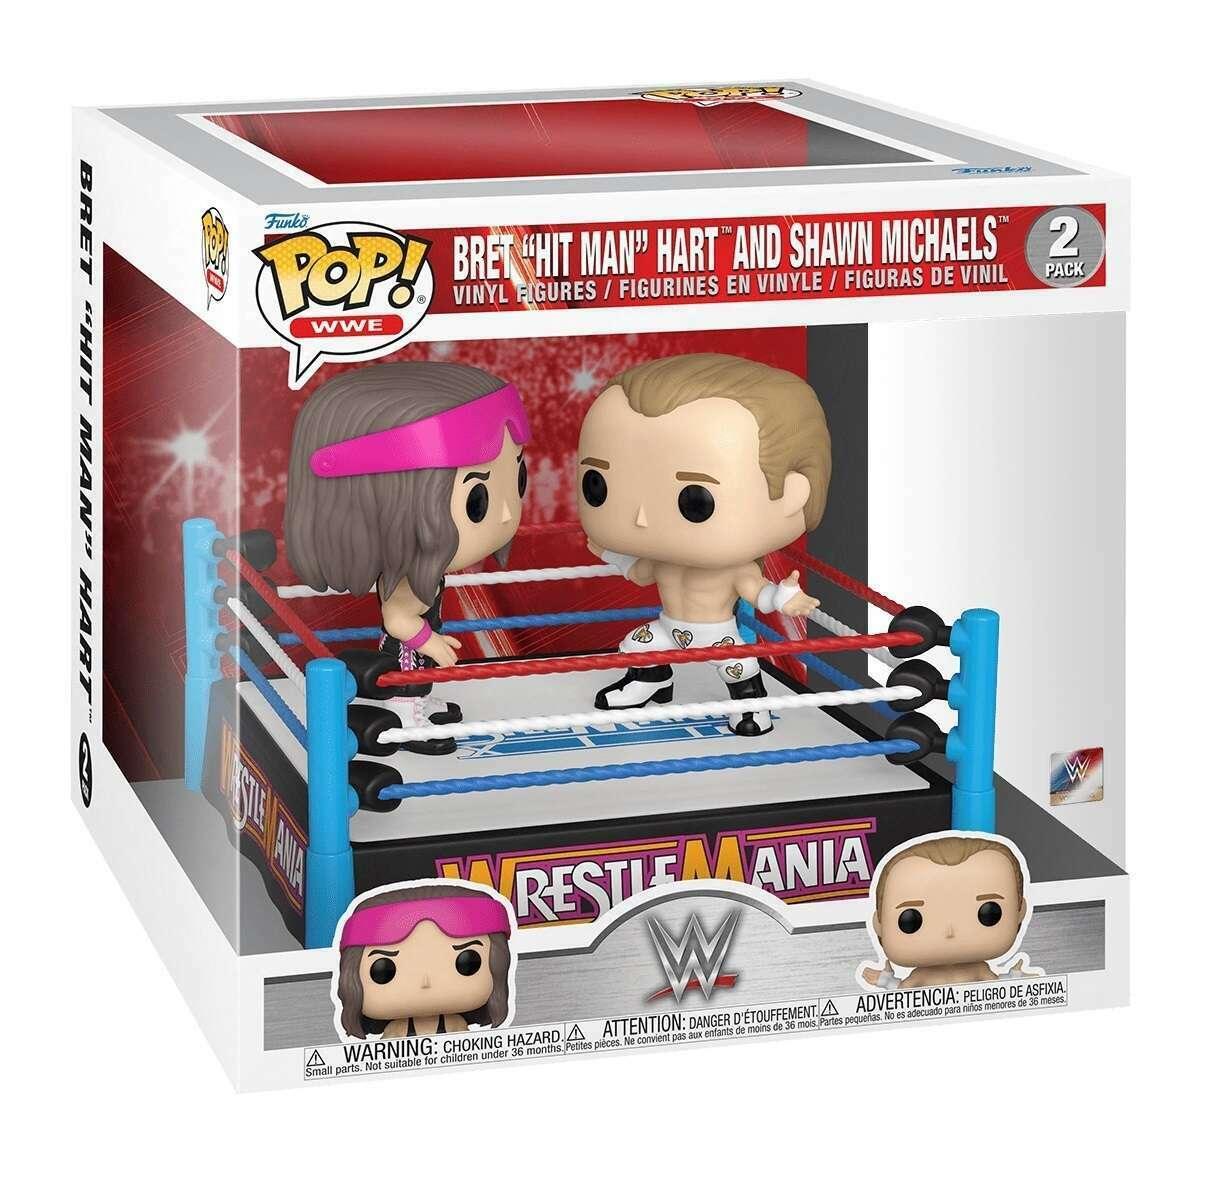 Pop! Moment - WWE - Bret "Hit Man" Hart And Shawn Michaels (2 Pack) - Hobby Champion Inc